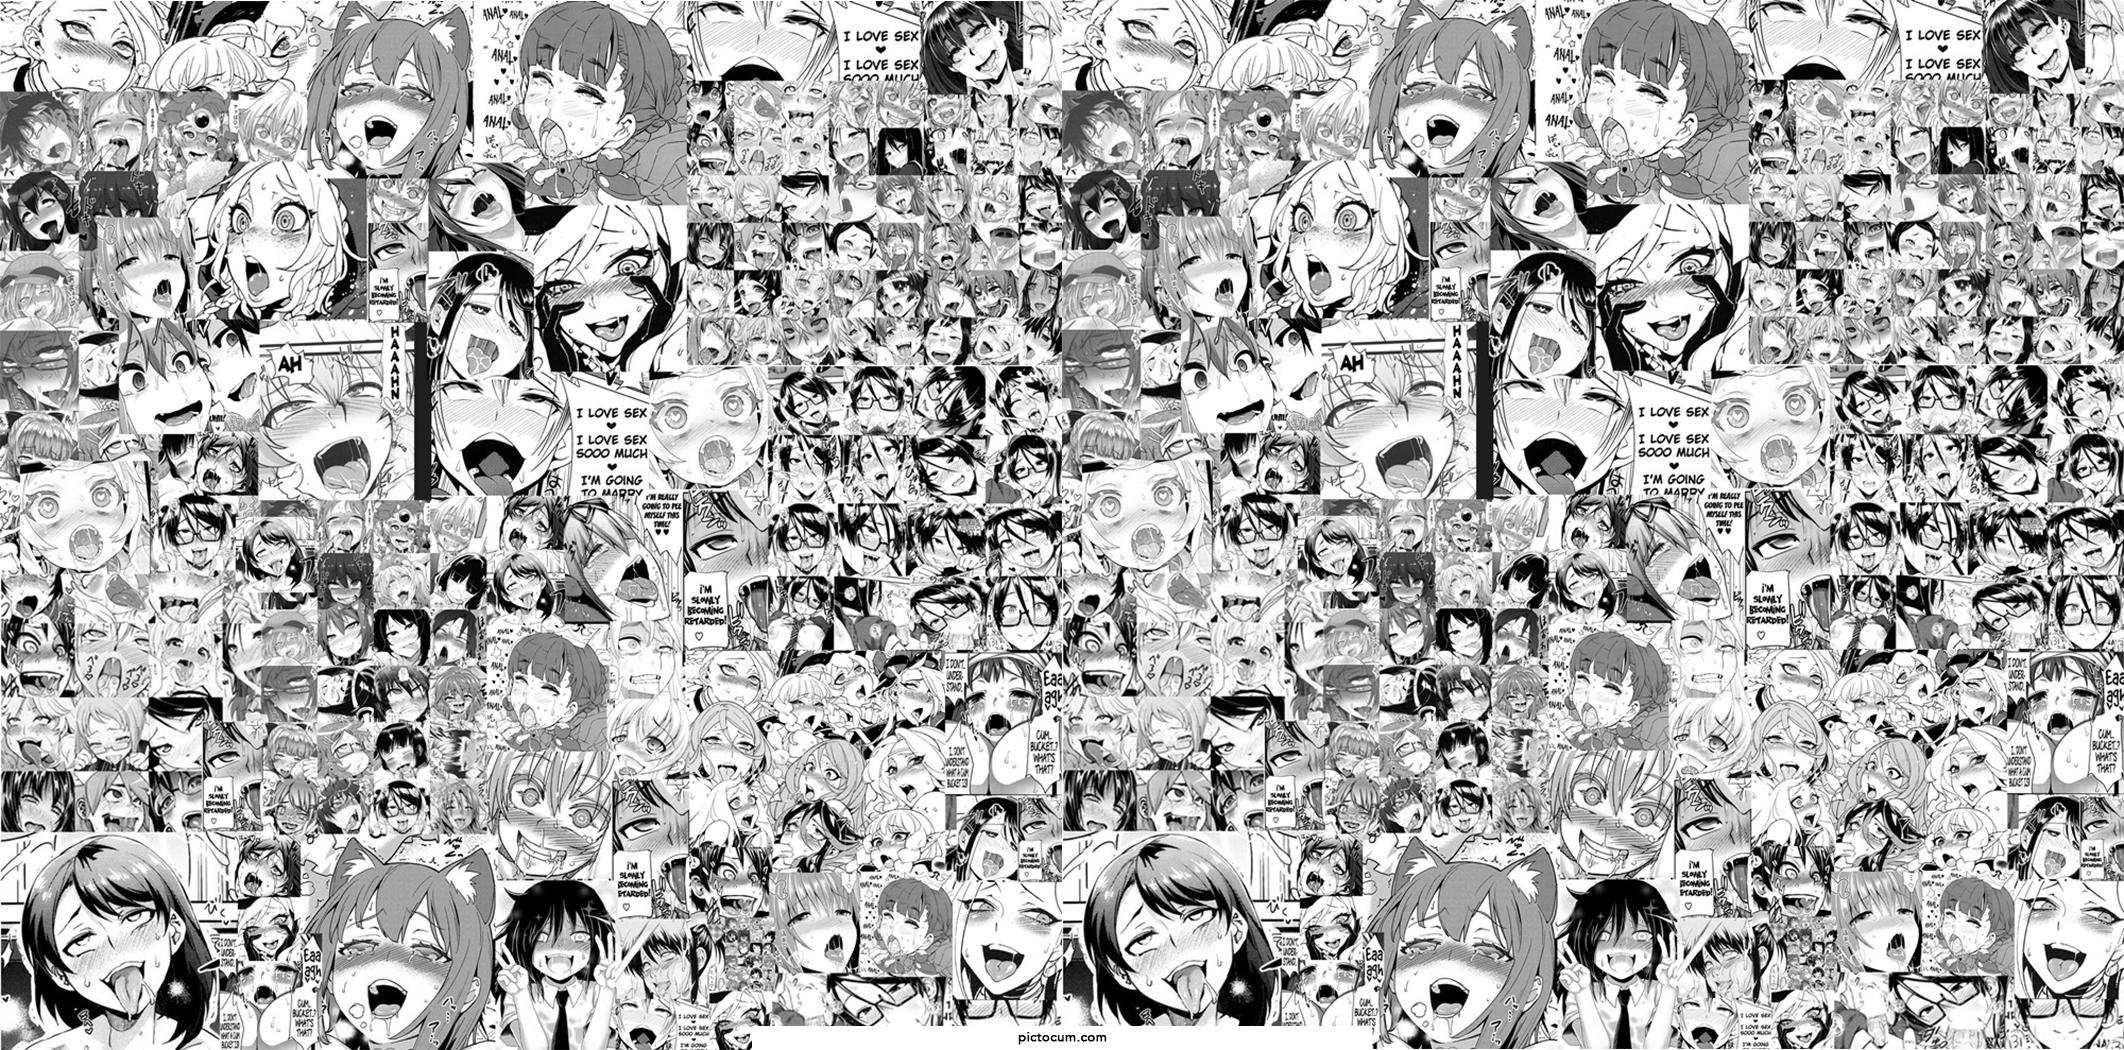 Ahegao background for steam or PC wallpaper